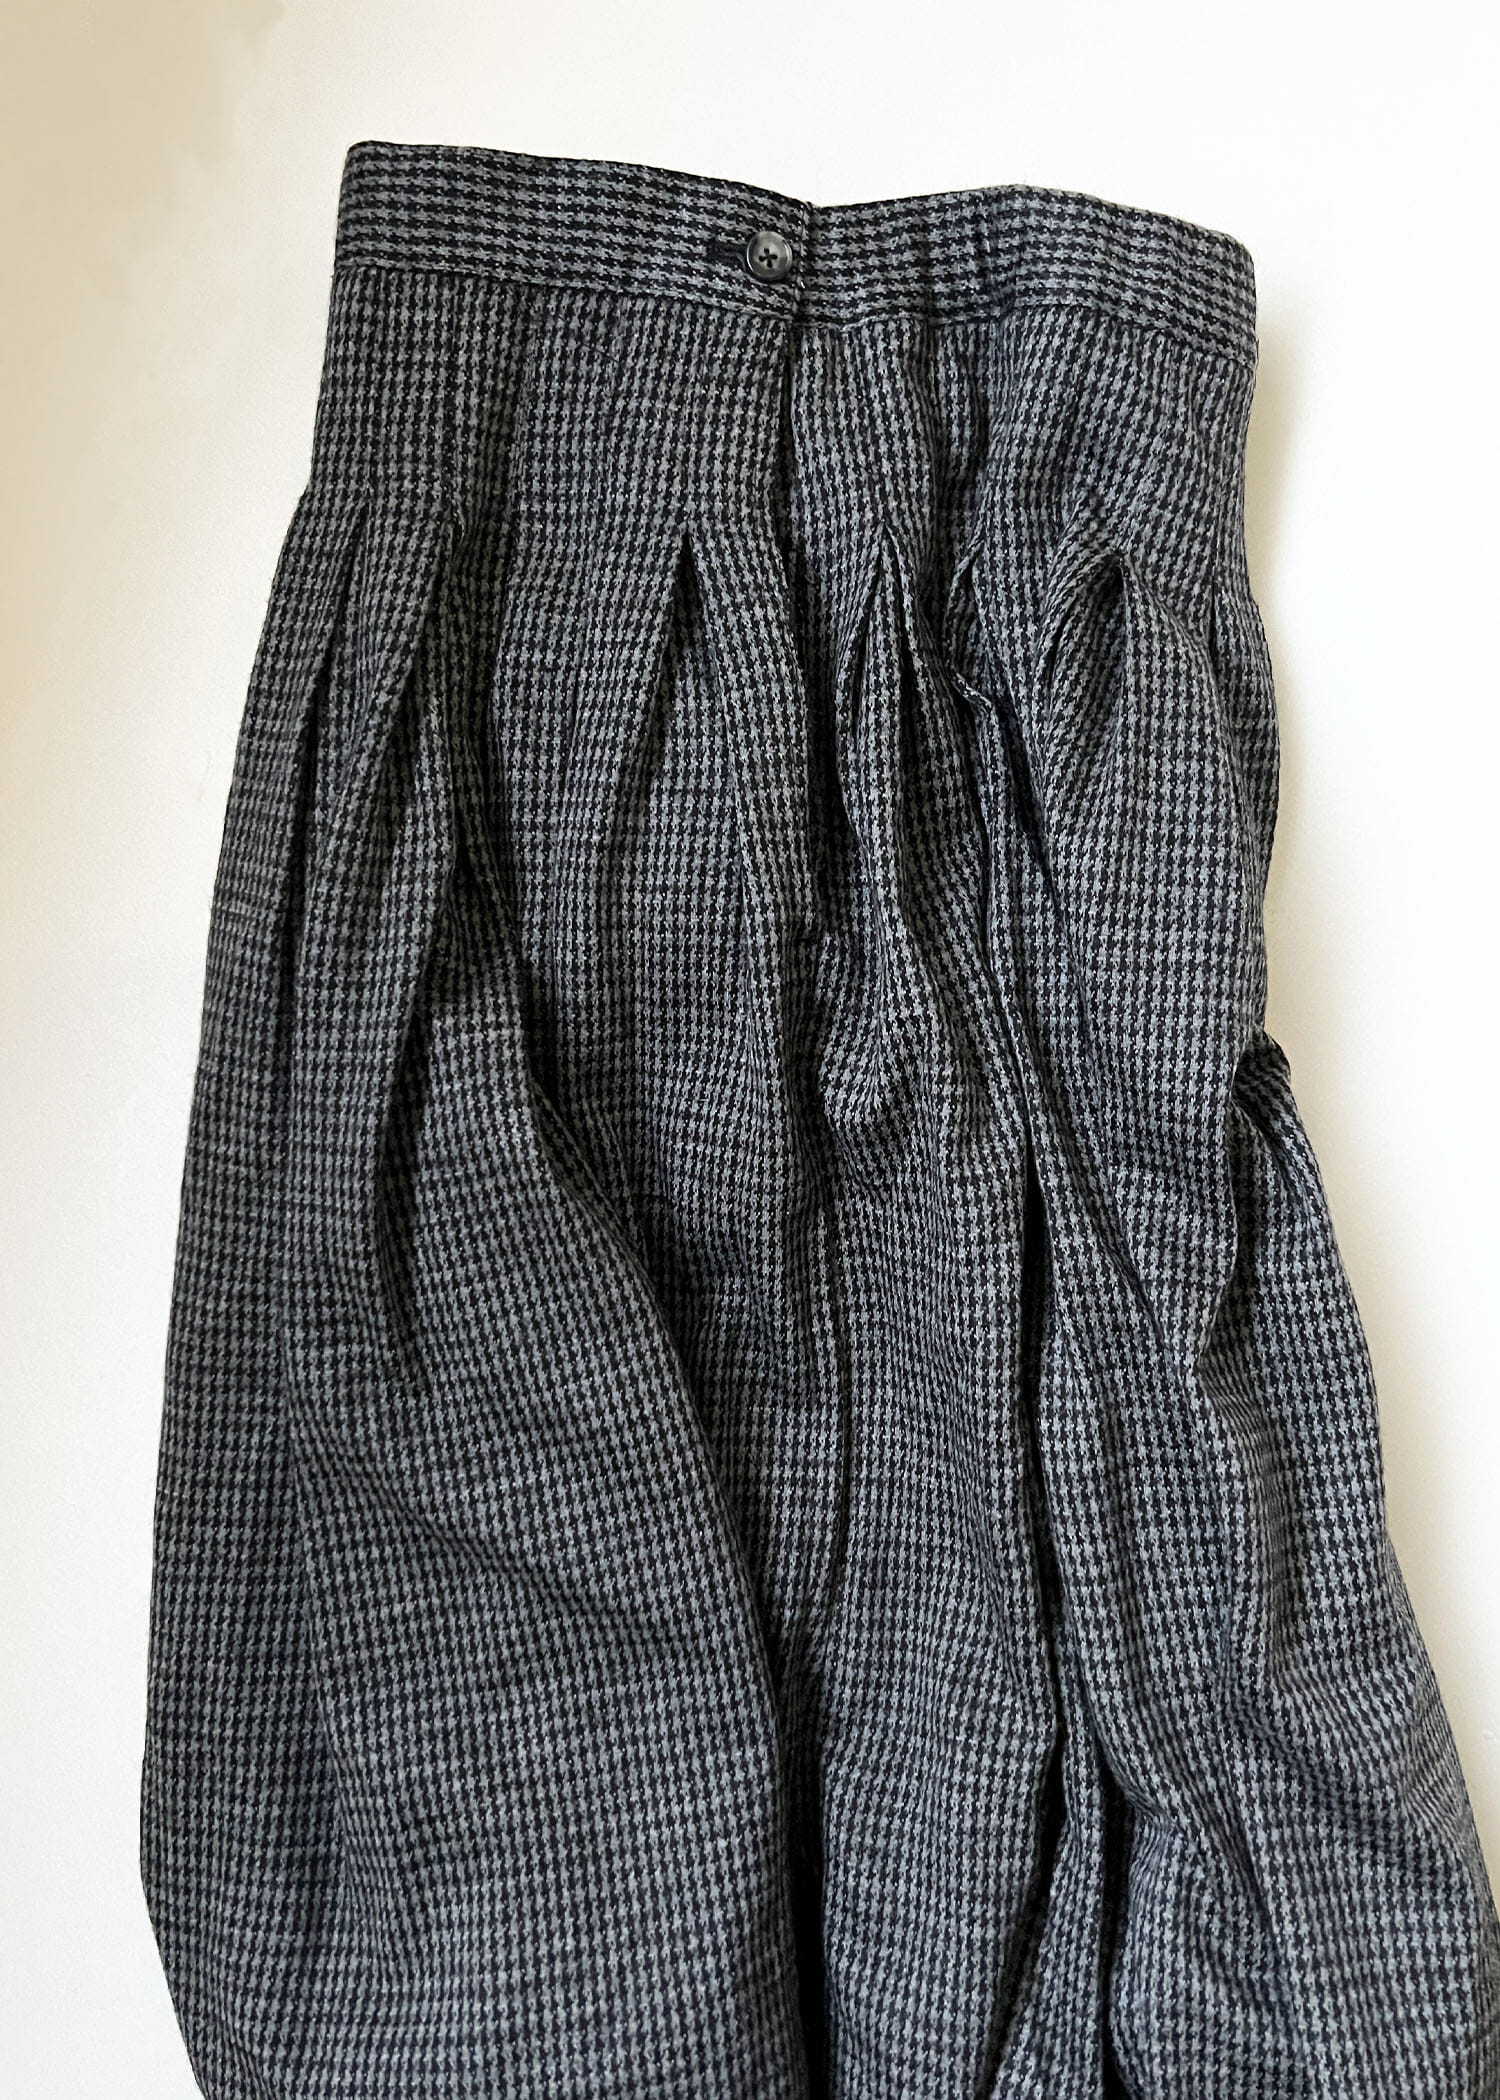 IS(issey sprots) by ISSEY MIYAKE pleats skirts